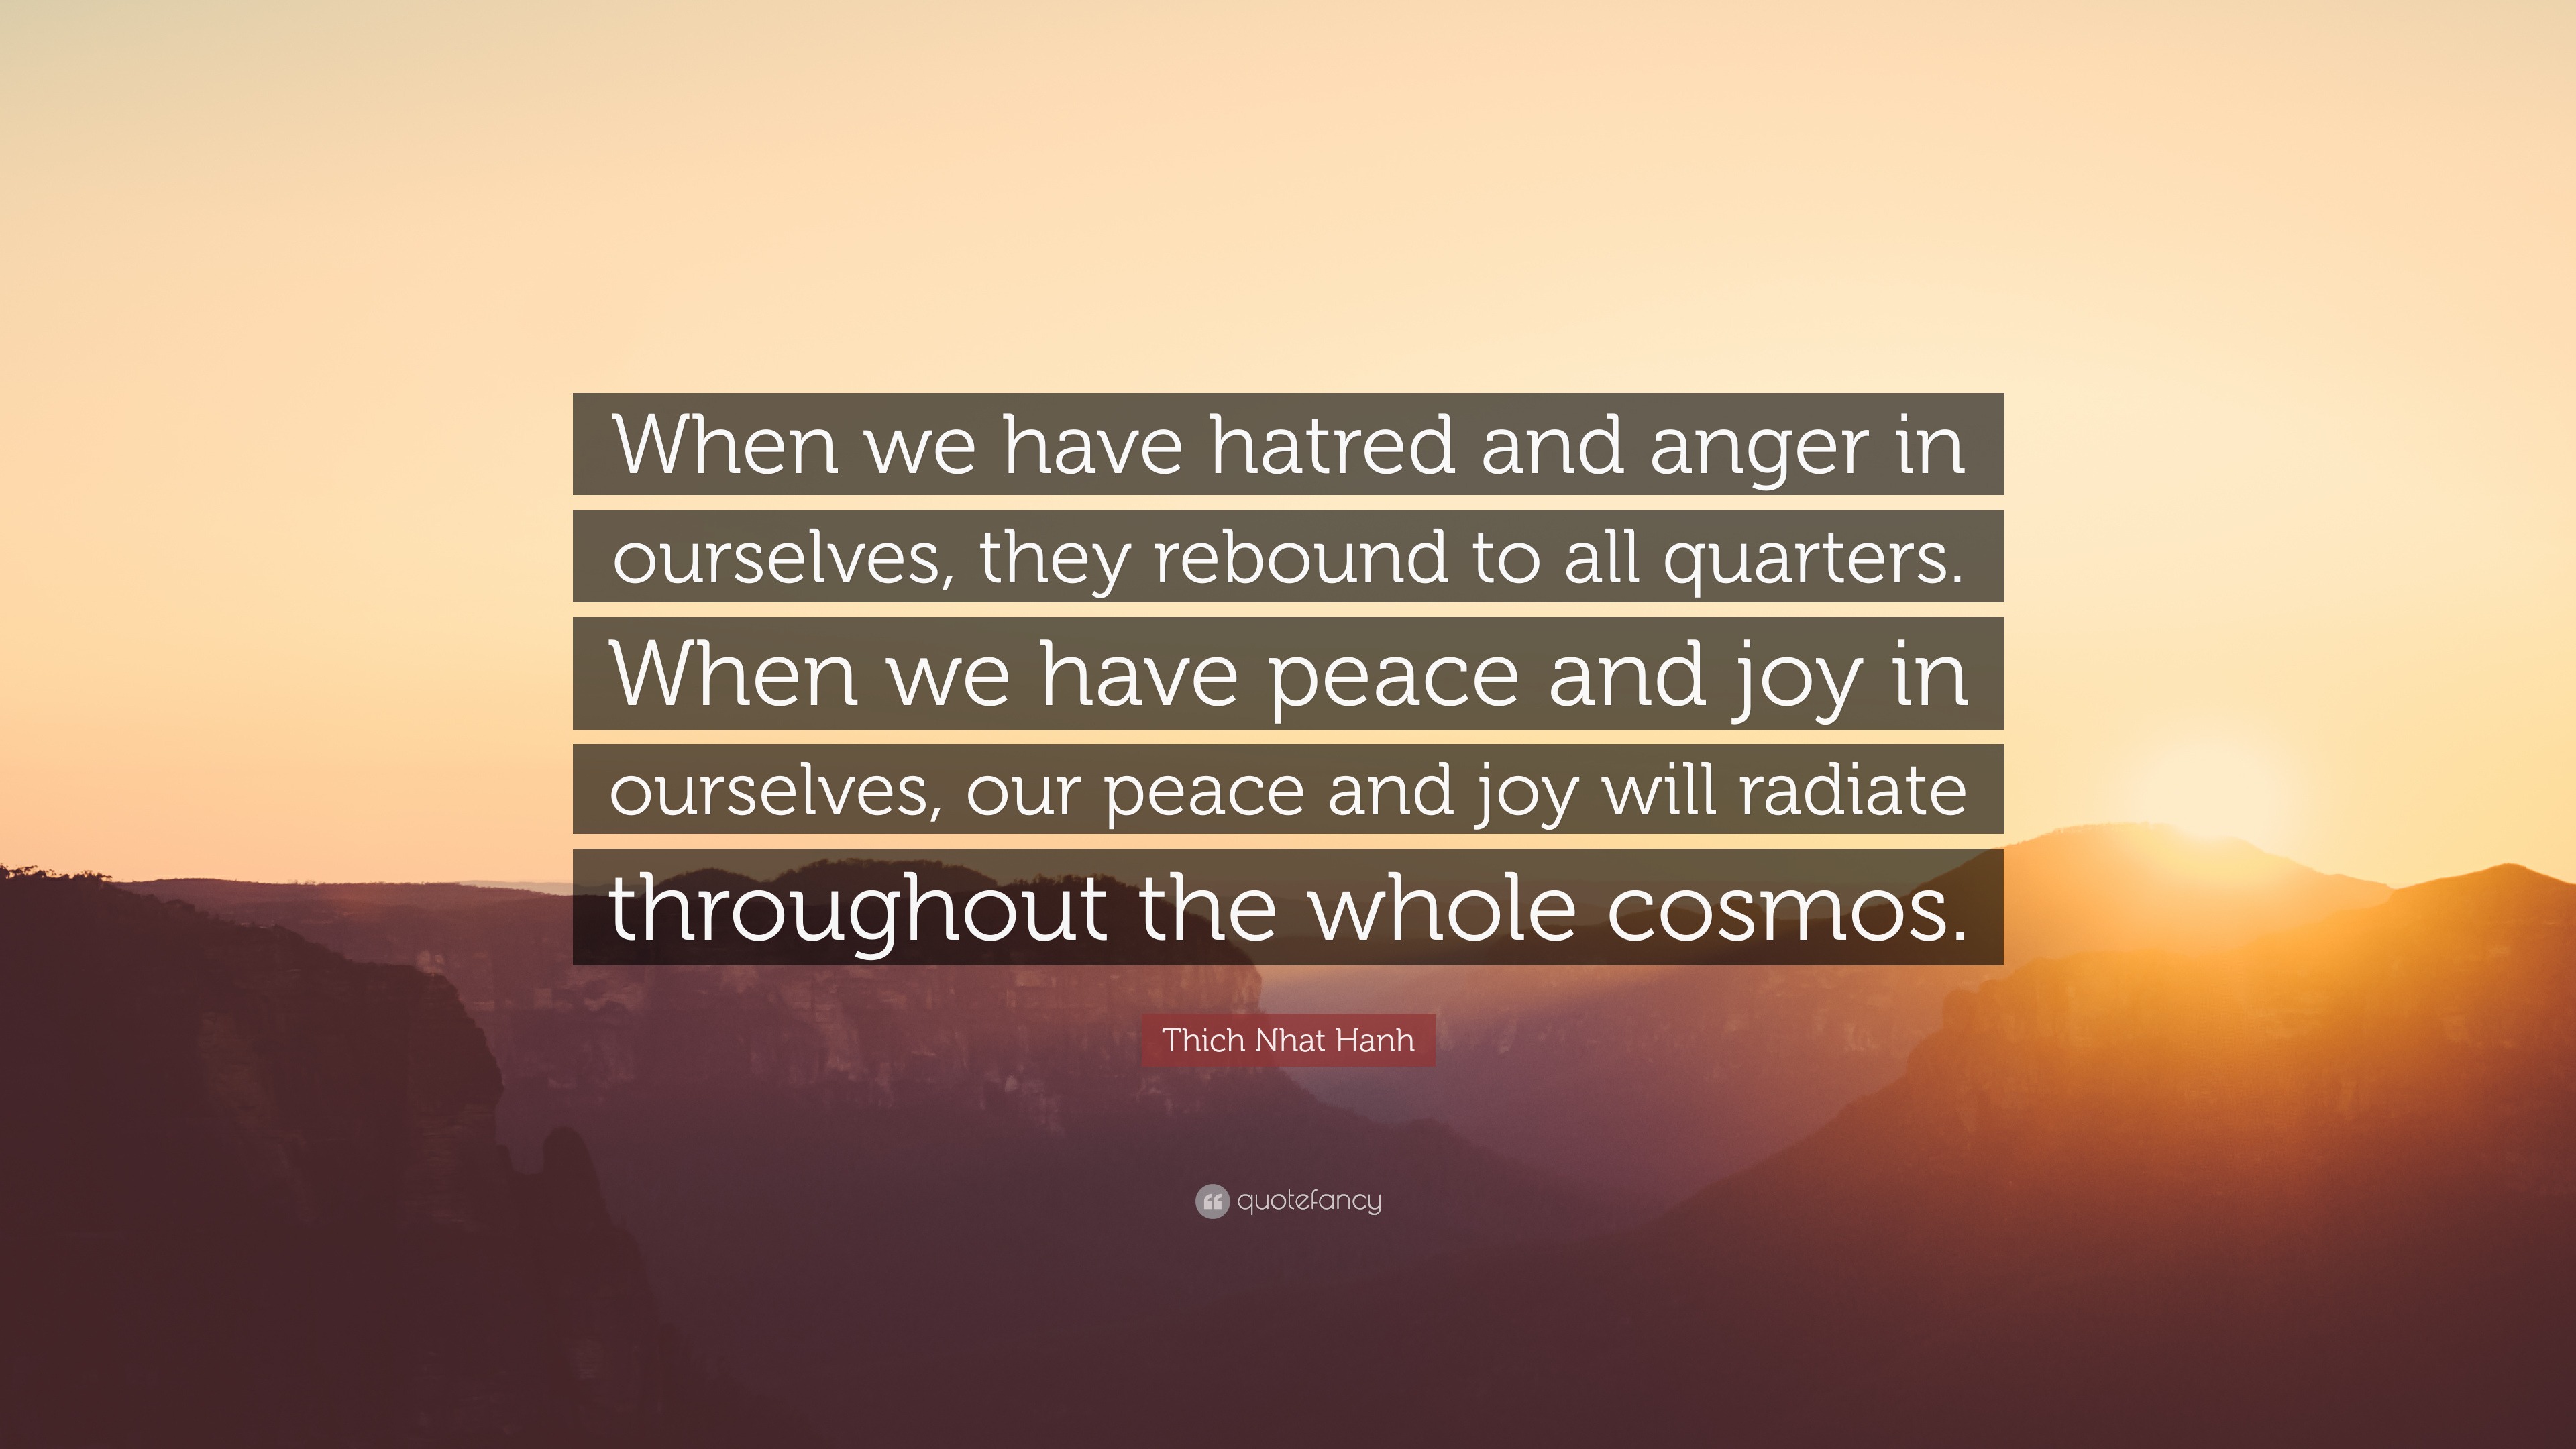 Thich Nhat Hanh Quote When We Have Hatred And Anger In Ourselves They Rebound To All Quarters When We Have Peace And Joy In Ourselves Our P